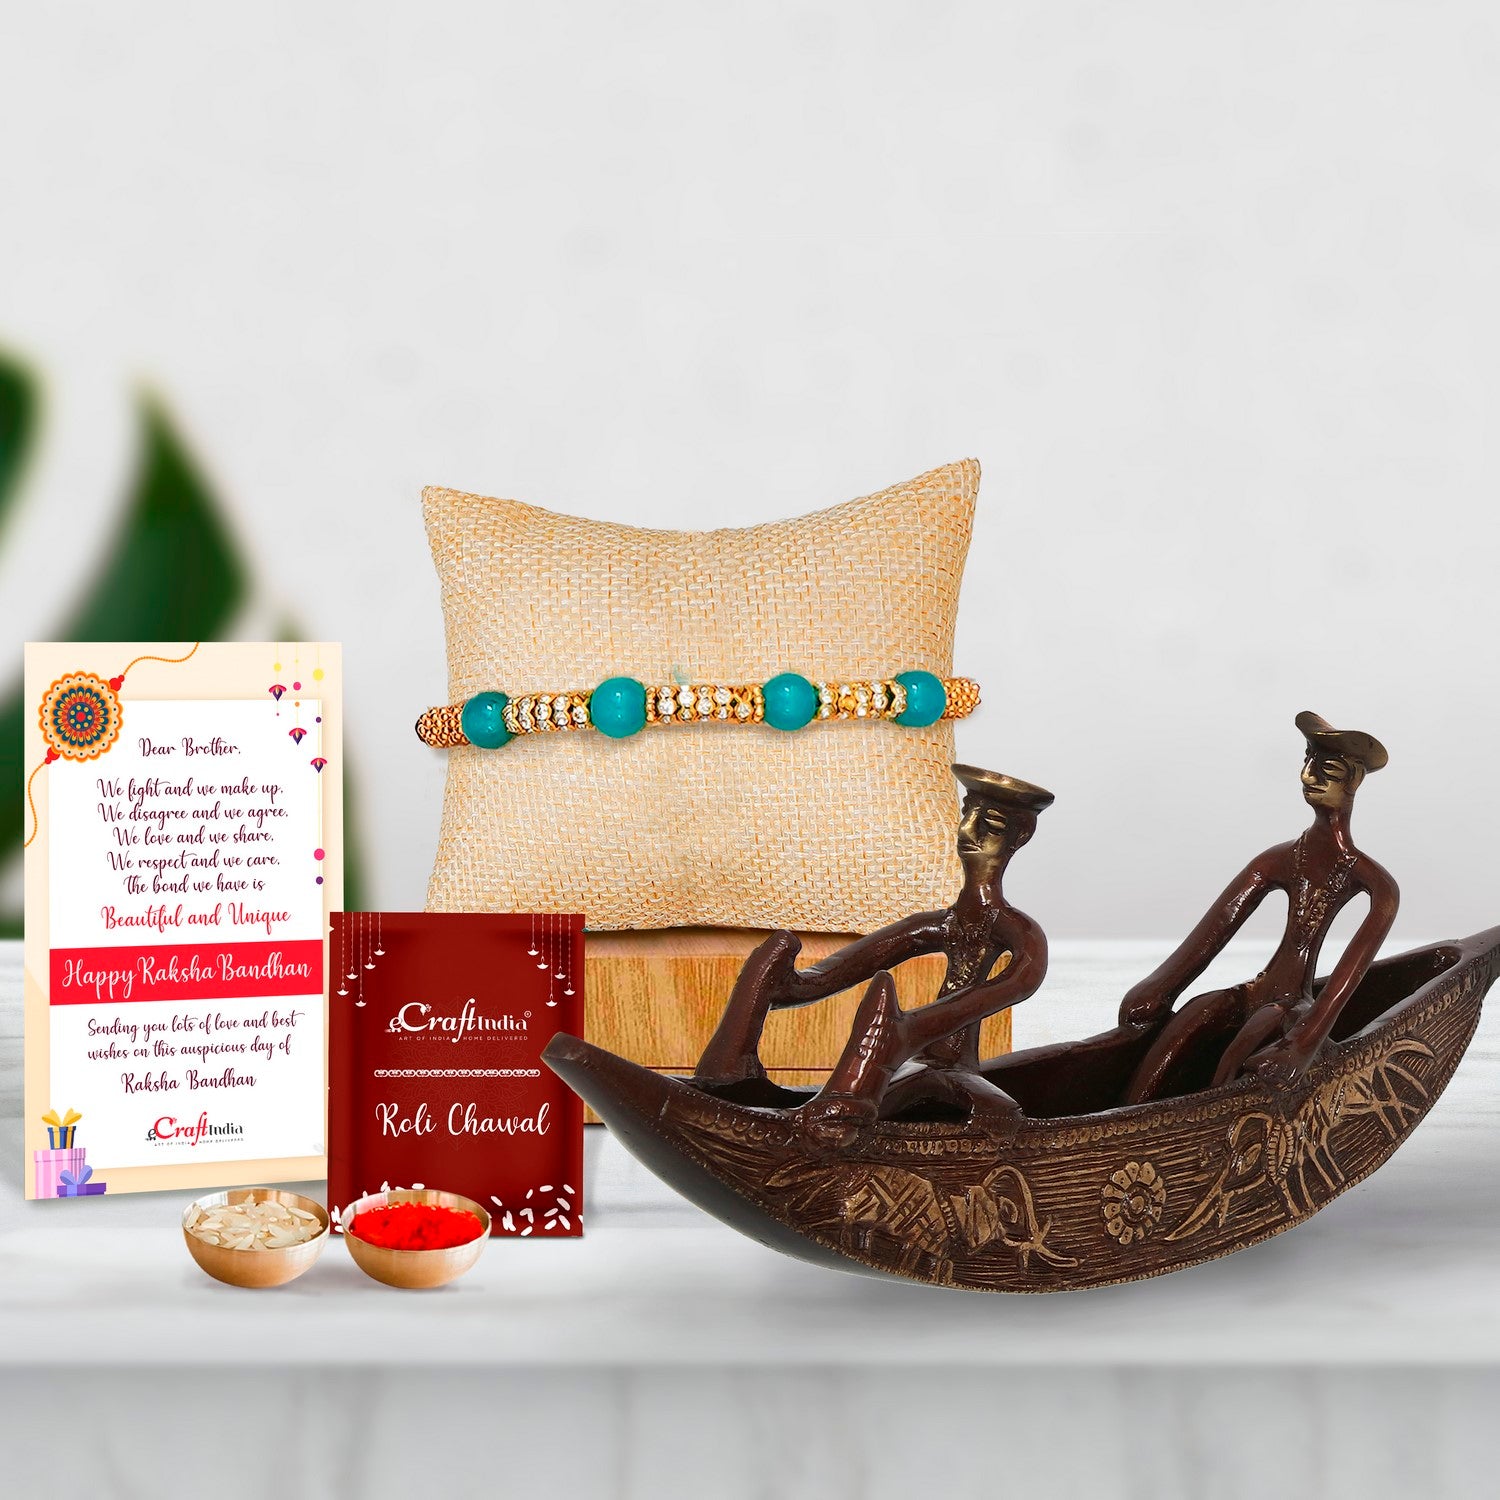 Designer Pearl Rakhi with Antique Finish 2 Men in Boat Brass Decorative Showpiece and Roli Chawal Pack, Best Wishes Greeting Card